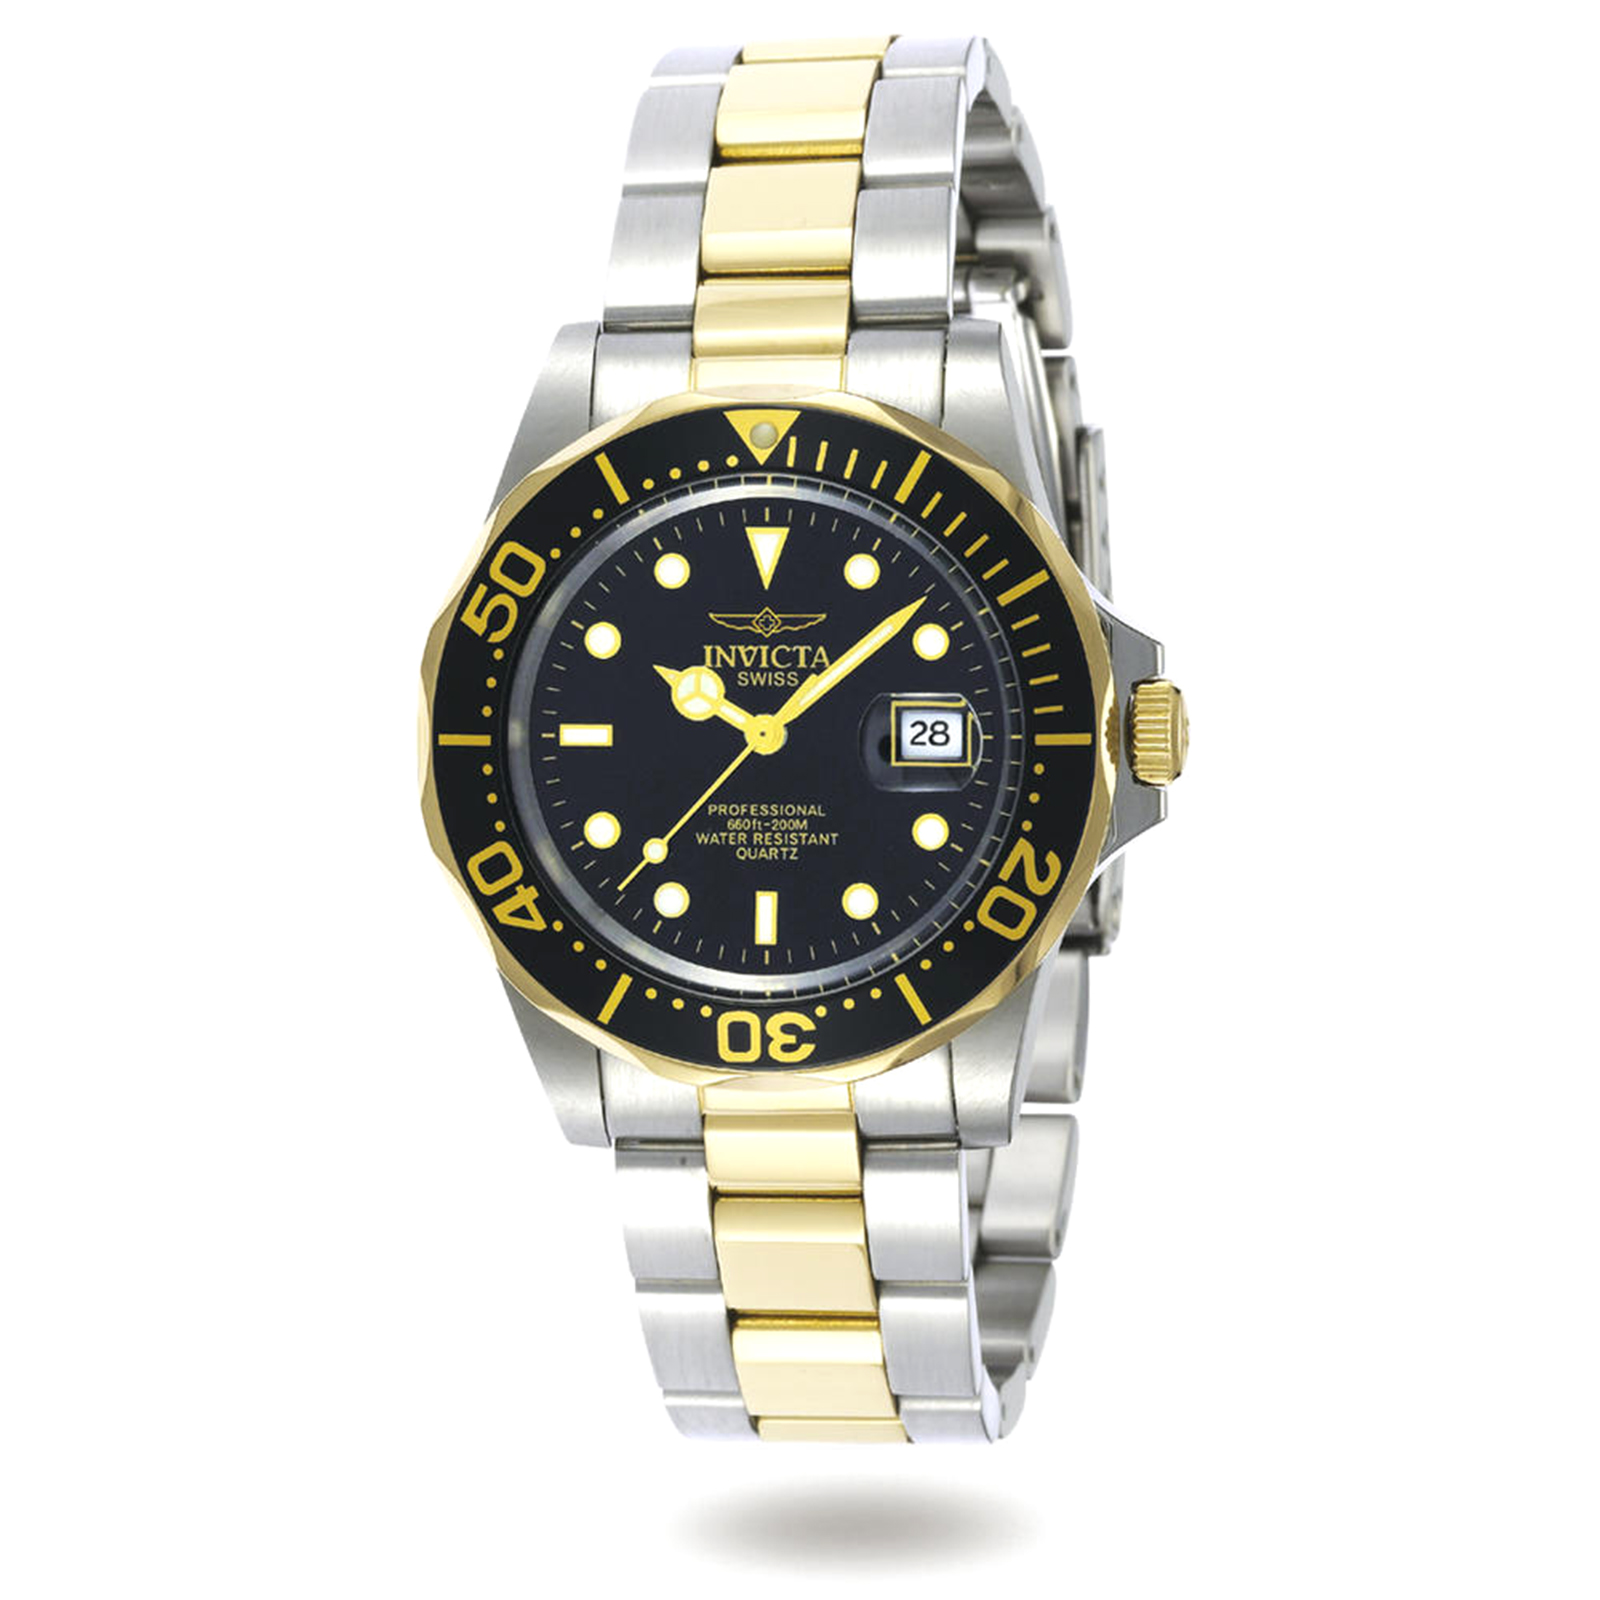 Invicta Pro Diver 9309 Stainless Steel Analog Watch-Sears Marketplace